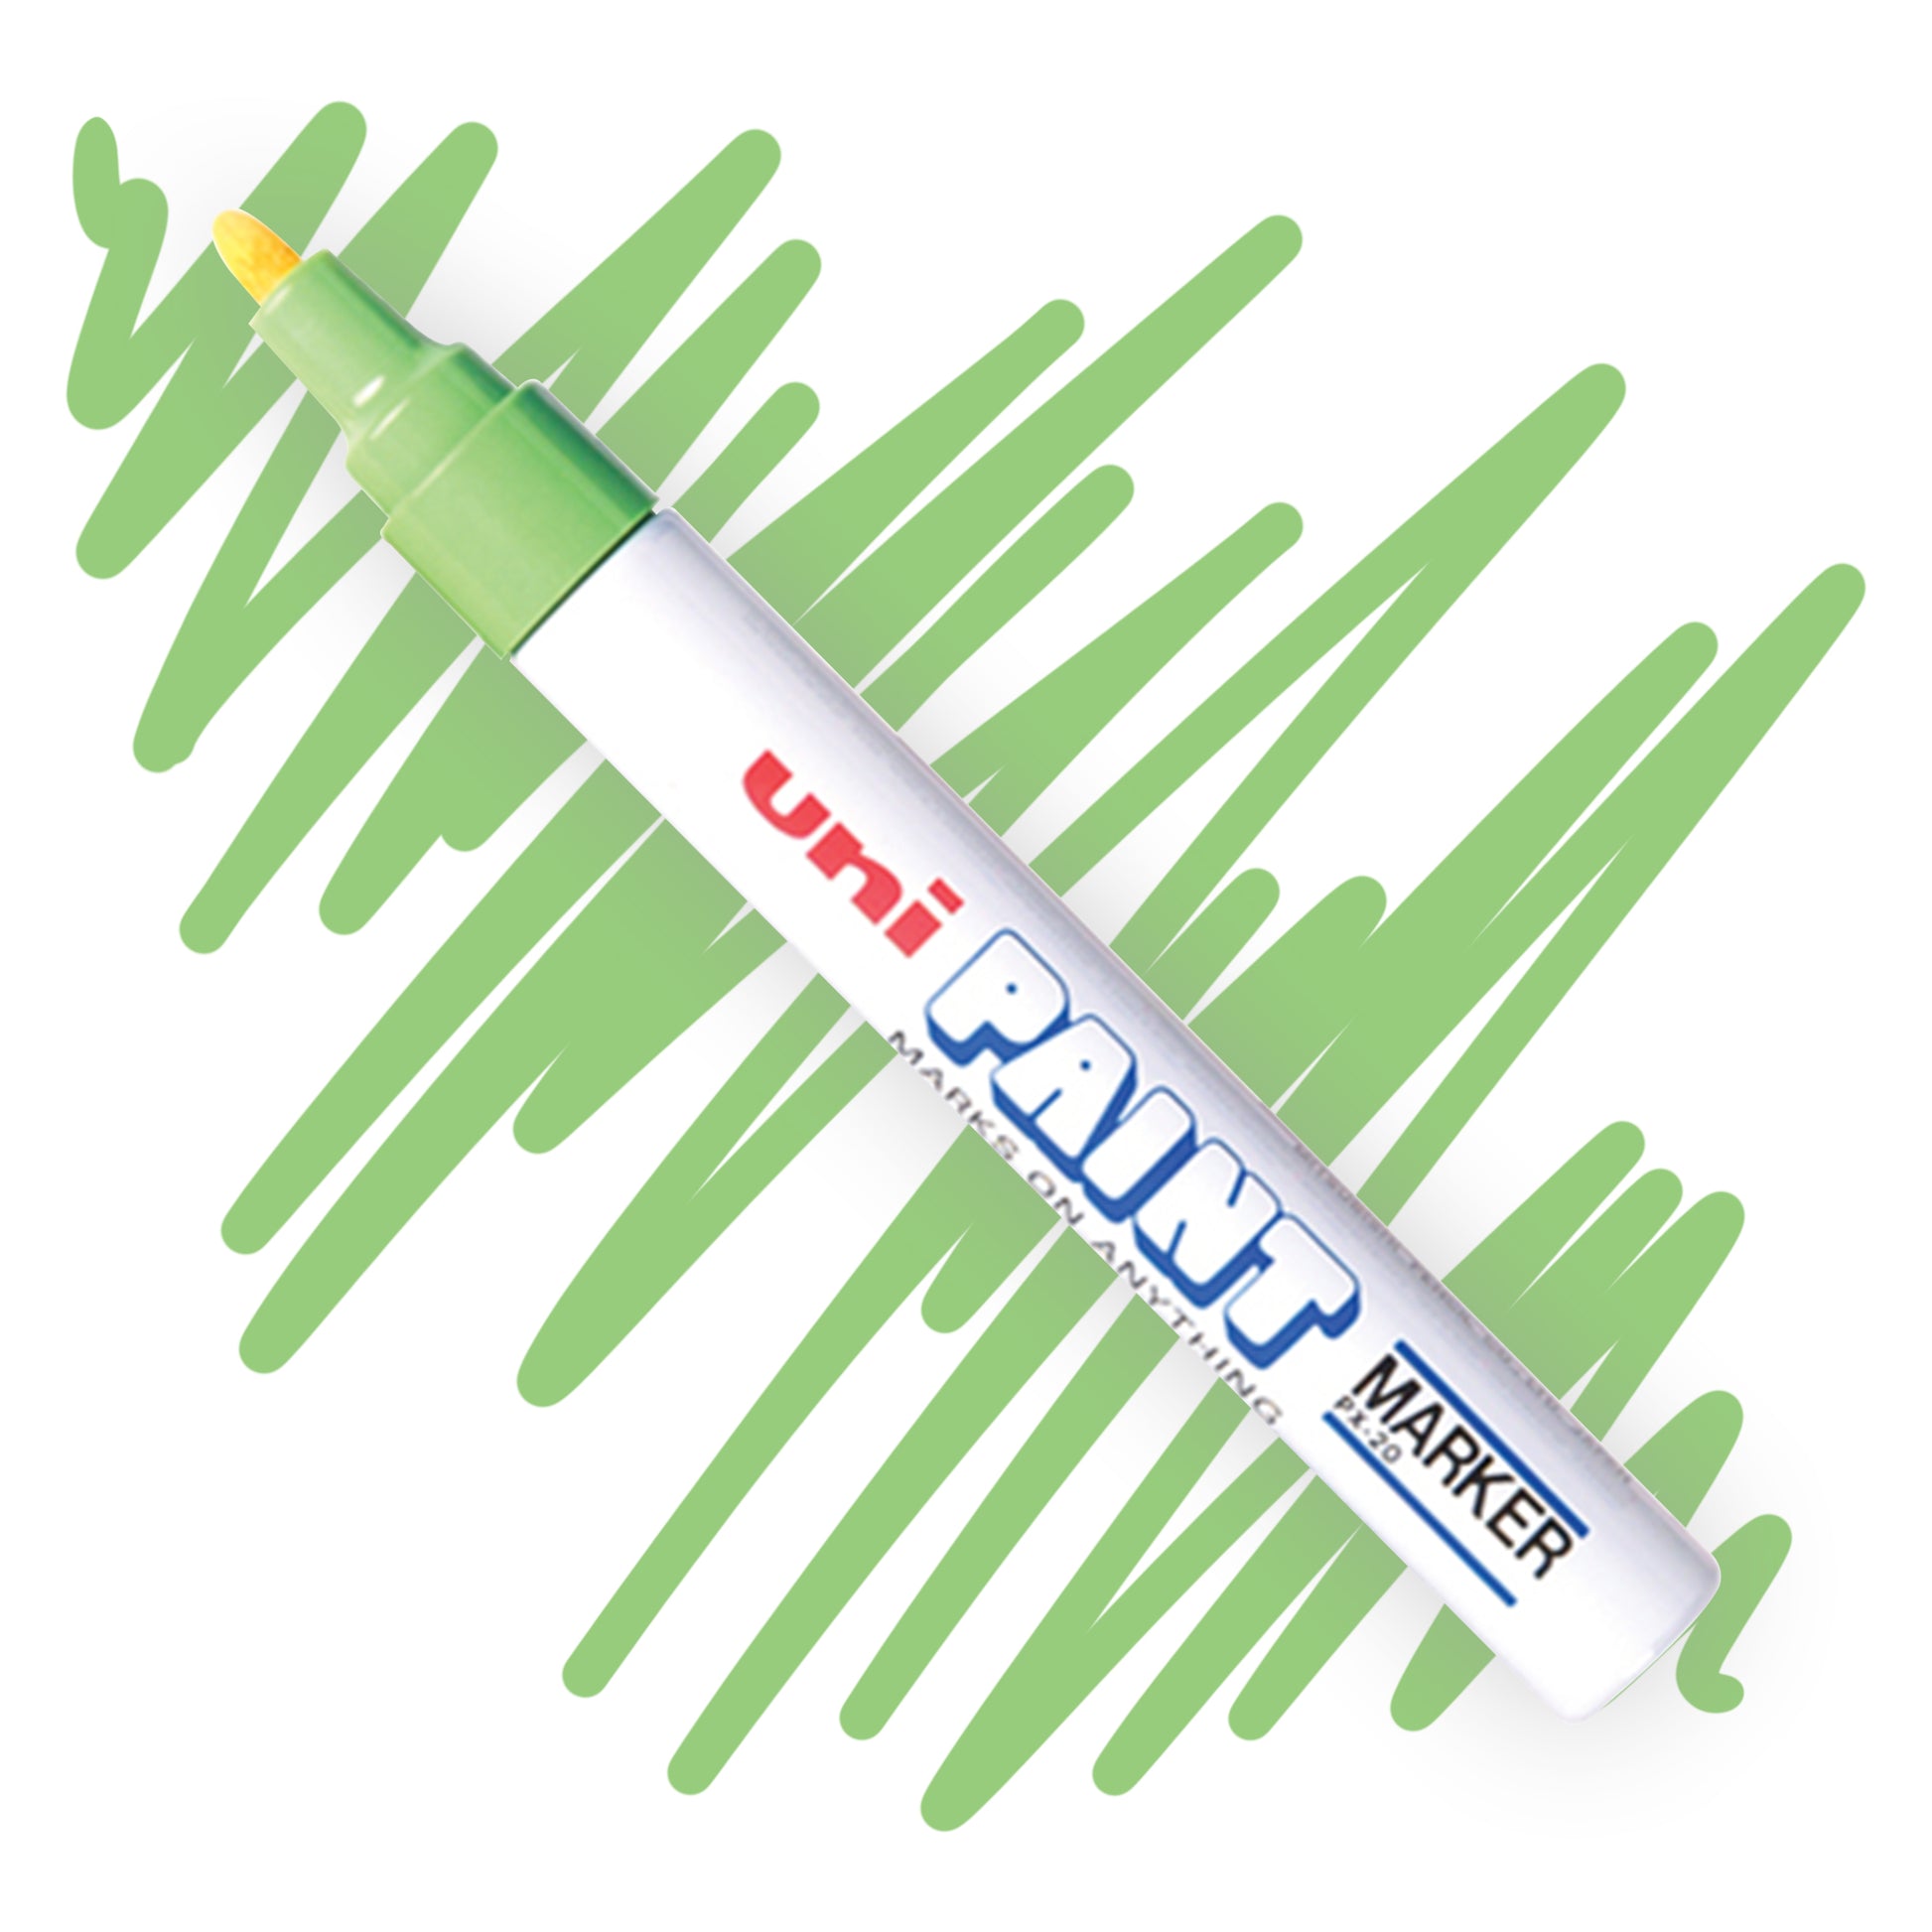 A white marker angled diagonally, the tip of the marker and the nib are colored light green. On the marker body the label reads "Uni PAINT Maker". Behind the marker is a color swatch of a squiggly line in light green.